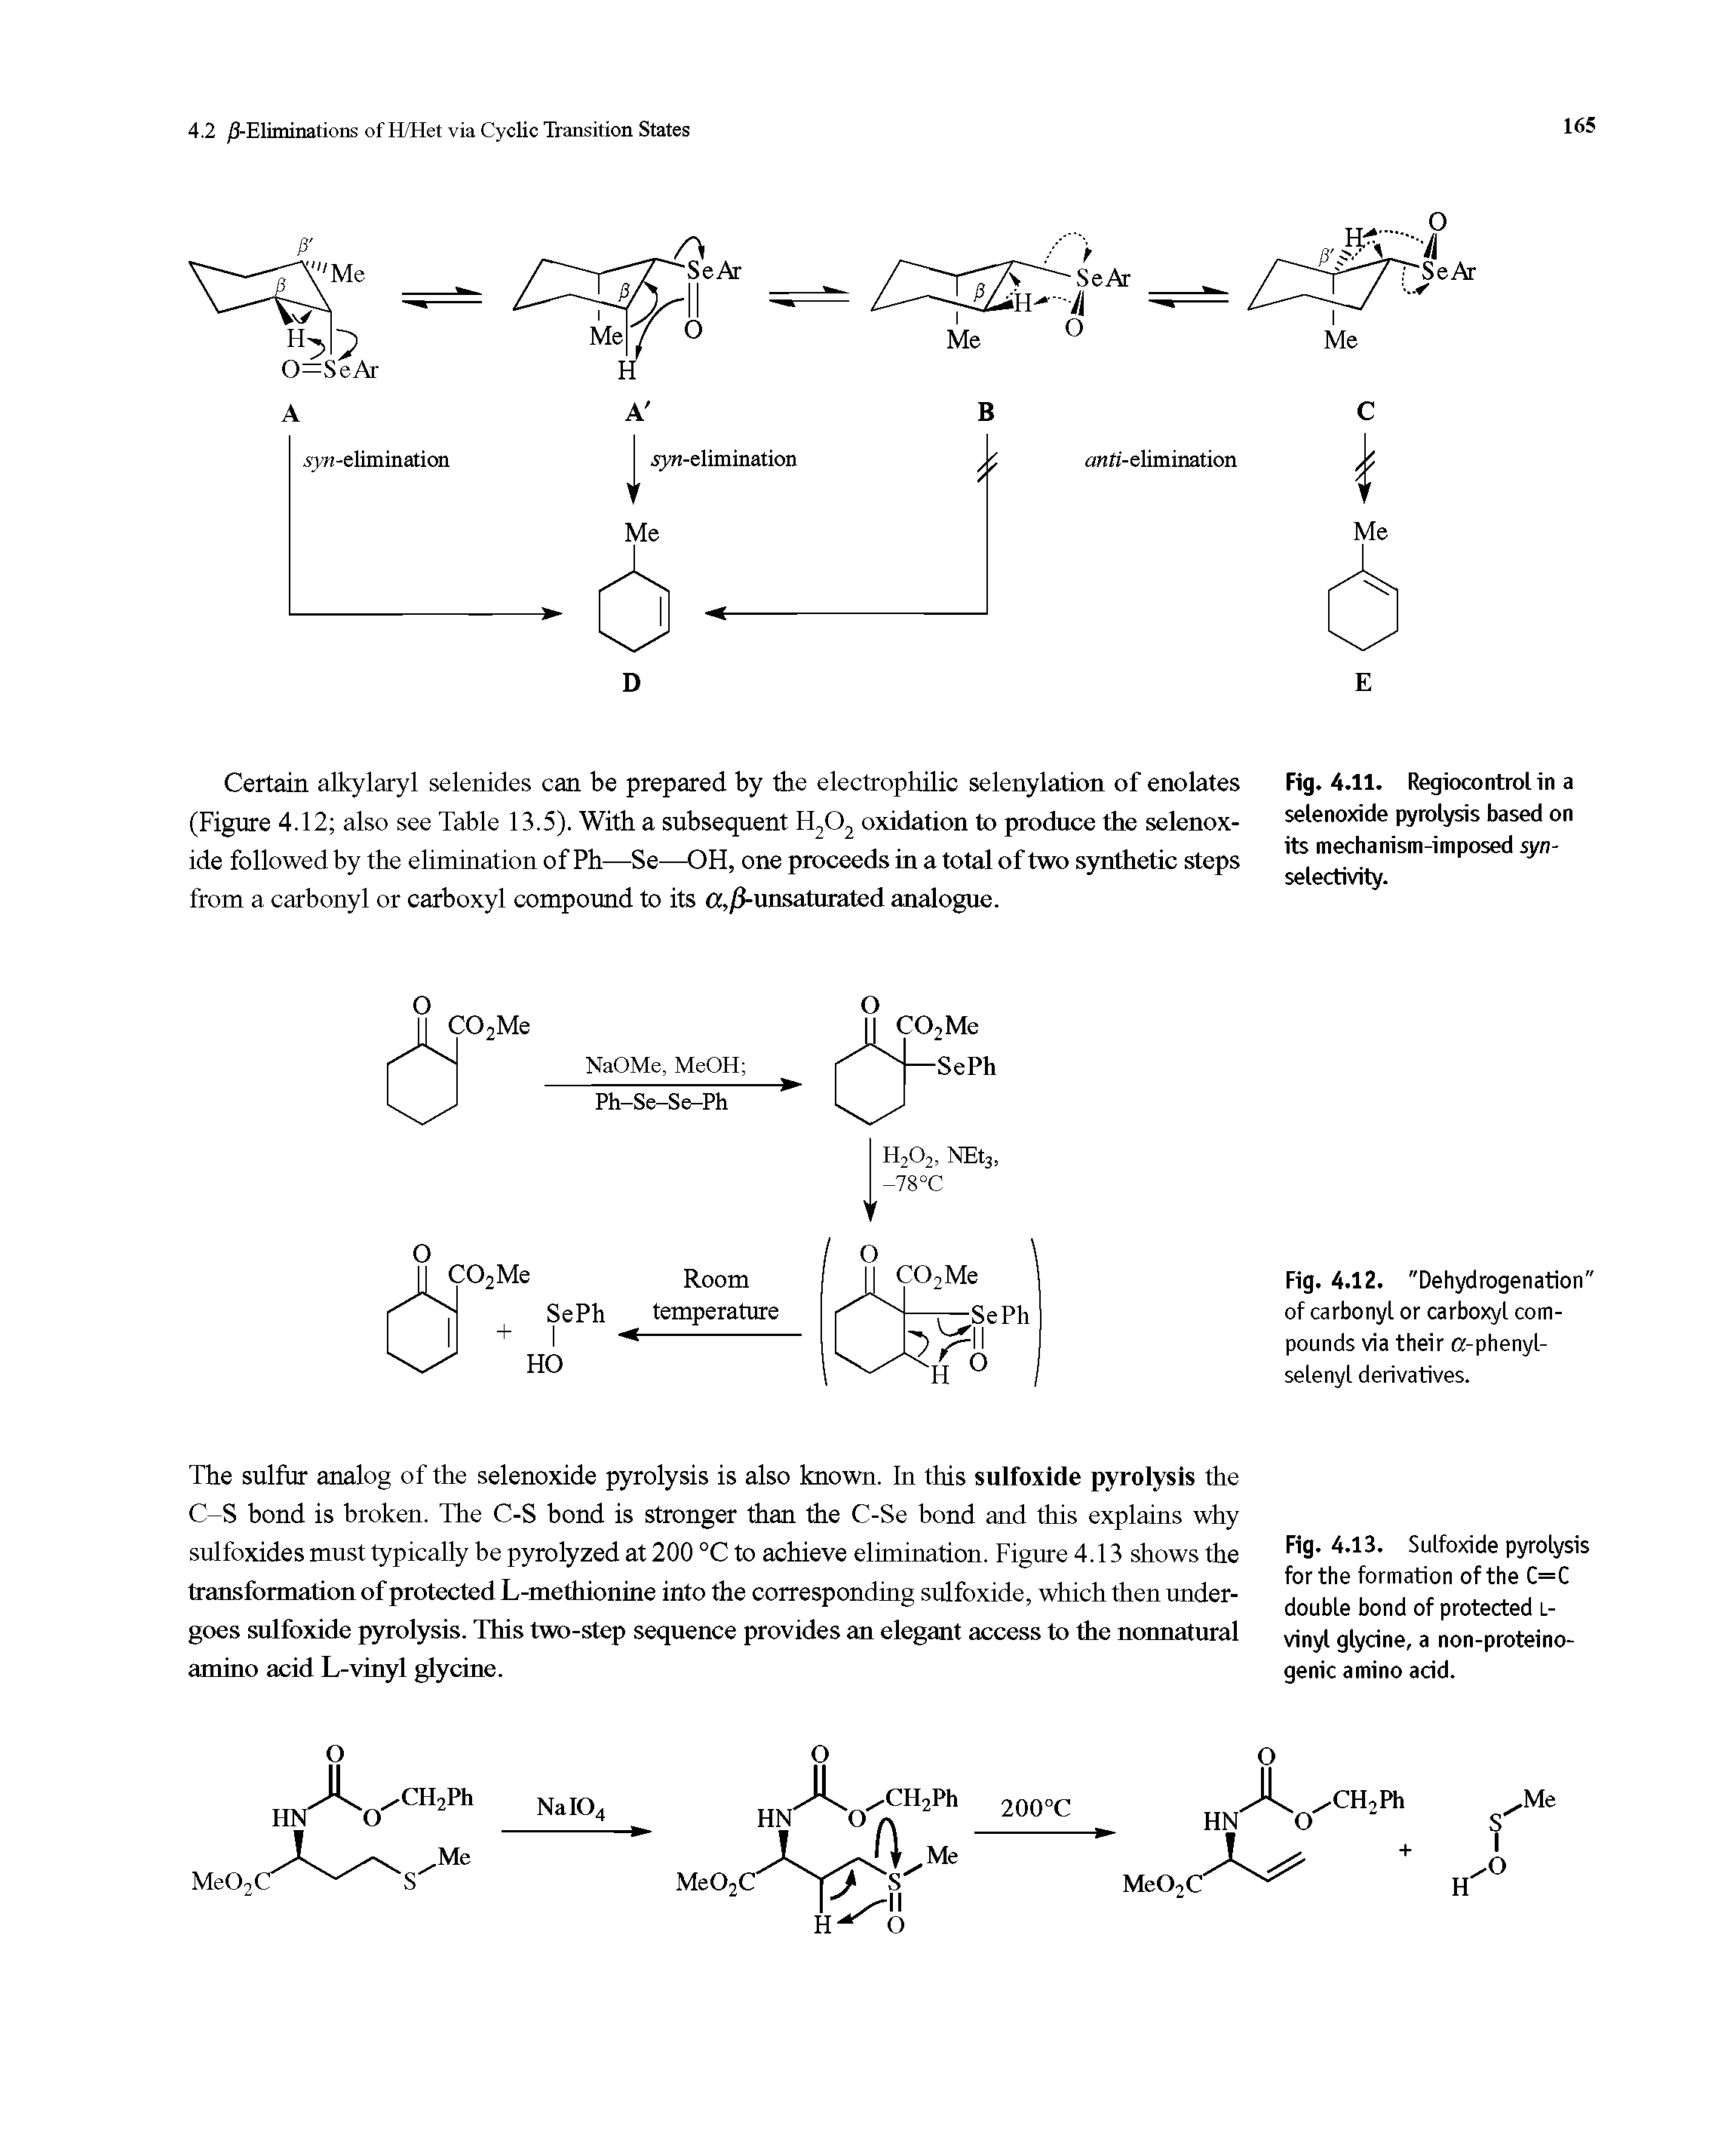 Fig. 4. 13. Sulfoxide pyrolysis for the formation of the C=C double bond of protected l-vinyl glycine, a non-proteino-genic amino acid.